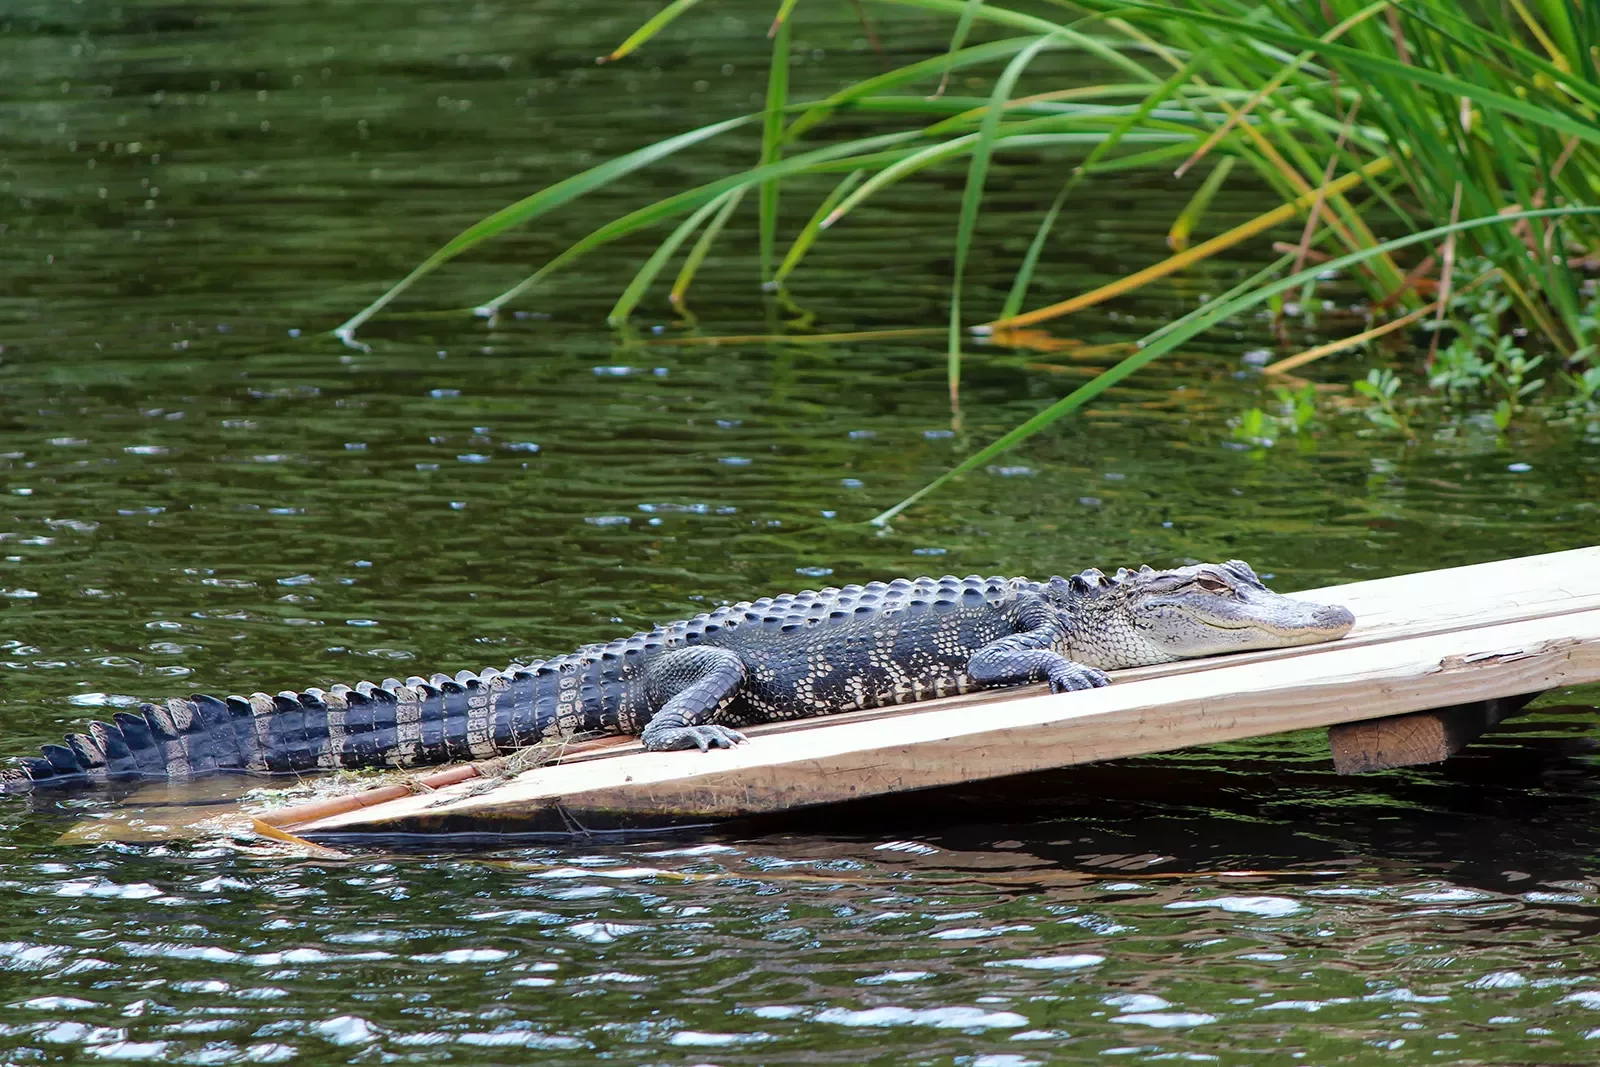 Close-up of alligator on small wooden deck.